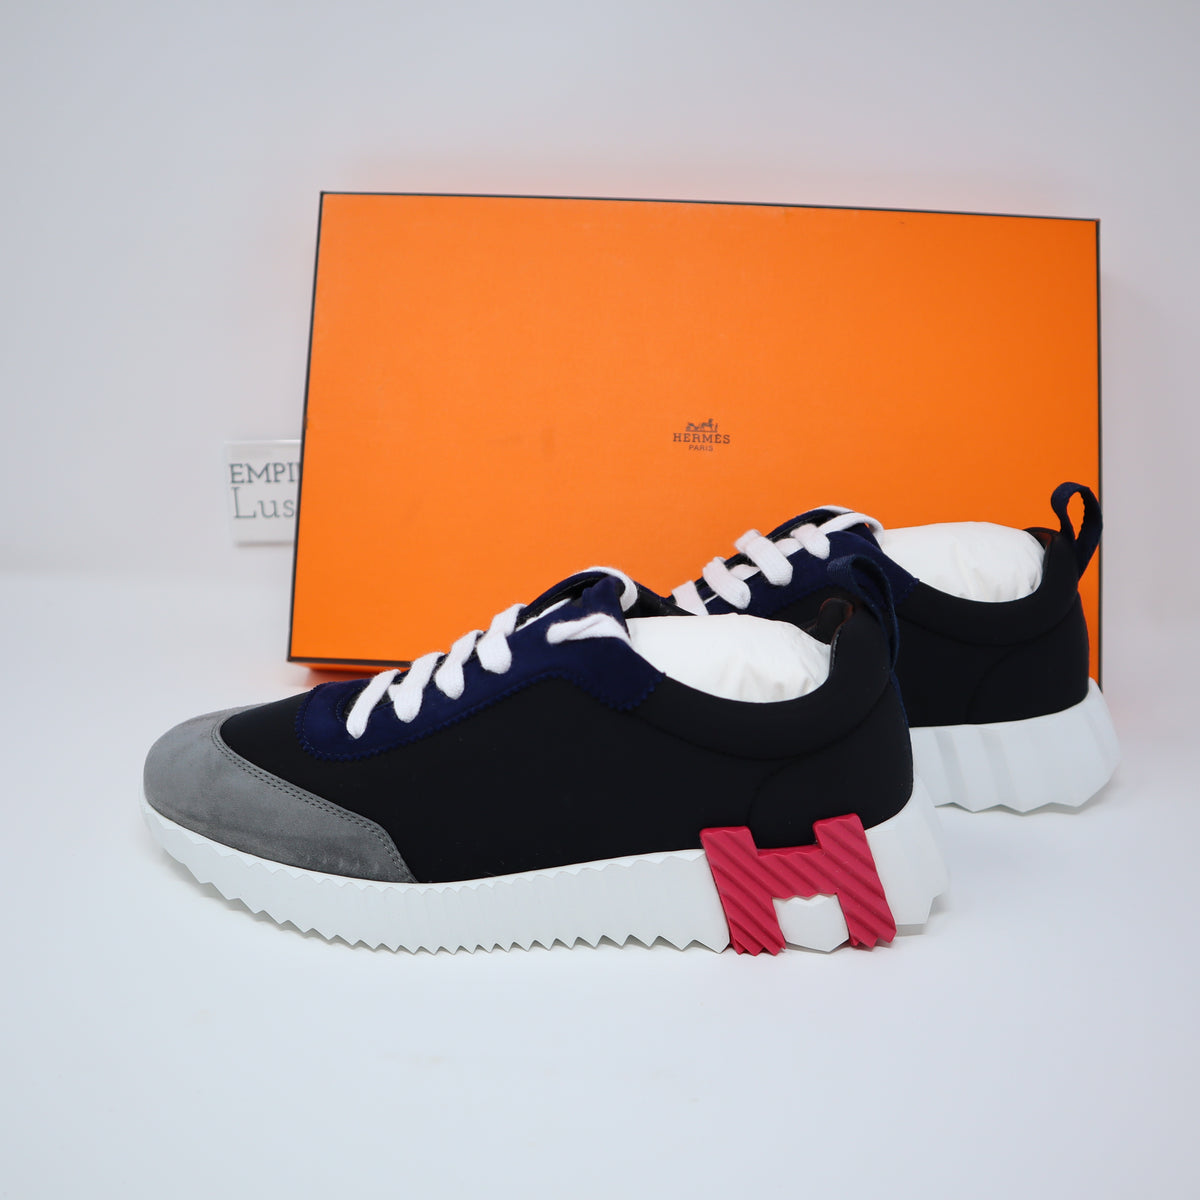 37.5 NEW HERMES Bouncing Sneakers Tricolor Neoprene and